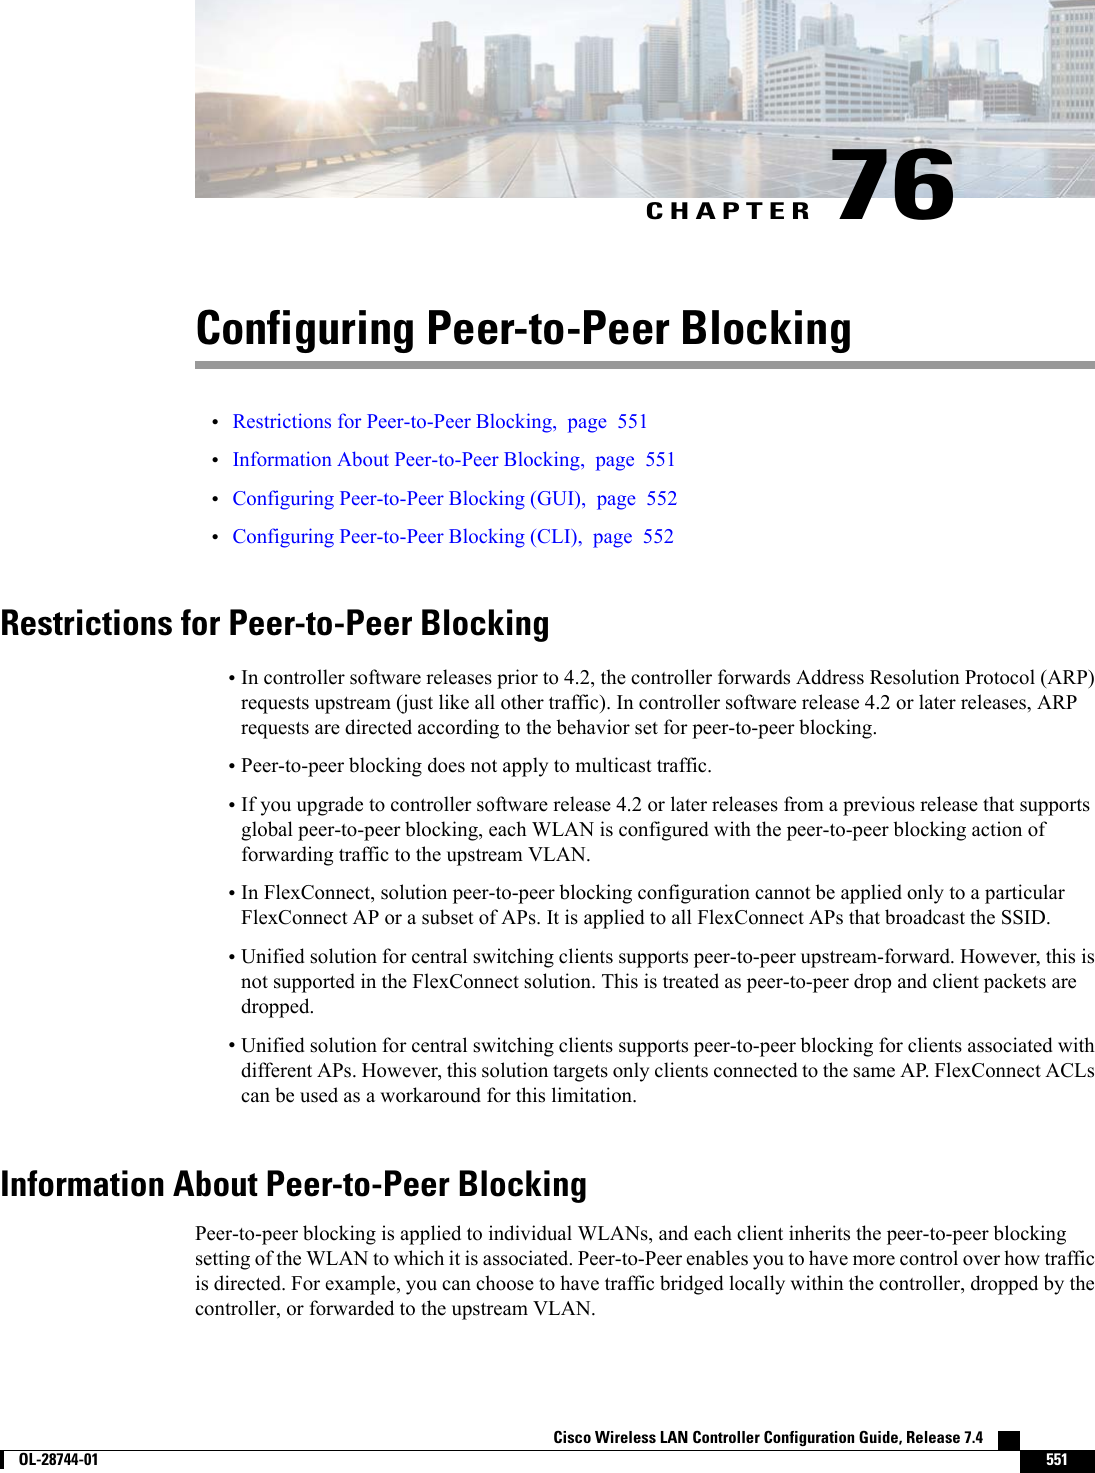 CHAPTER 76Configuring Peer-to-Peer Blocking•Restrictions for Peer-to-Peer Blocking, page 551•Information About Peer-to-Peer Blocking, page 551•Configuring Peer-to-Peer Blocking (GUI), page 552•Configuring Peer-to-Peer Blocking (CLI), page 552Restrictions for Peer-to-Peer Blocking•In controller software releases prior to 4.2, the controller forwards Address Resolution Protocol (ARP)requests upstream (just like all other traffic). In controller software release 4.2 or later releases, ARPrequests are directed according to the behavior set for peer-to-peer blocking.•Peer-to-peer blocking does not apply to multicast traffic.•If you upgrade to controller software release 4.2 or later releases from a previous release that supportsglobal peer-to-peer blocking, each WLAN is configured with the peer-to-peer blocking action offorwarding traffic to the upstream VLAN.•In FlexConnect, solution peer-to-peer blocking configuration cannot be applied only to a particularFlexConnect AP or a subset of APs. It is applied to all FlexConnect APs that broadcast the SSID.•Unified solution for central switching clients supports peer-to-peer upstream-forward. However, this isnot supported in the FlexConnect solution. This is treated as peer-to-peer drop and client packets aredropped.•Unified solution for central switching clients supports peer-to-peer blocking for clients associated withdifferent APs. However, this solution targets only clients connected to the same AP. FlexConnect ACLscan be used as a workaround for this limitation.Information About Peer-to-Peer BlockingPeer-to-peer blocking is applied to individual WLANs, and each client inherits the peer-to-peer blockingsetting of the WLAN to which it is associated. Peer-to-Peer enables you to have more control over how trafficis directed. For example, you can choose to have traffic bridged locally within the controller, dropped by thecontroller, or forwarded to the upstream VLAN.Cisco Wireless LAN Controller Configuration Guide, Release 7.4        OL-28744-01 551